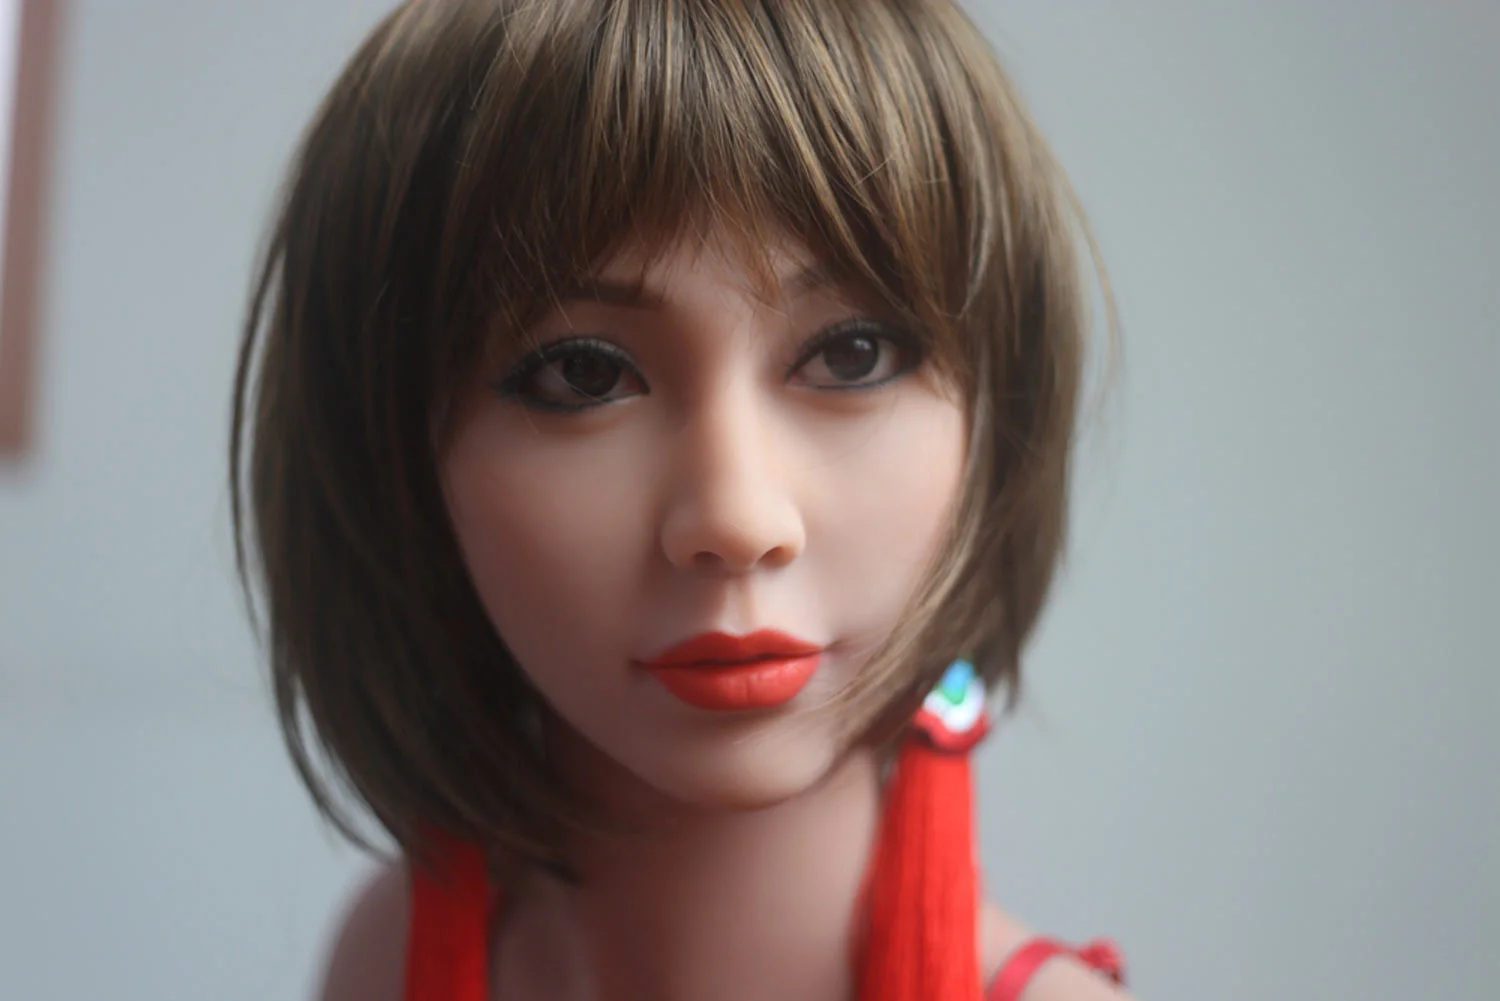 Sex doll with short brown hair